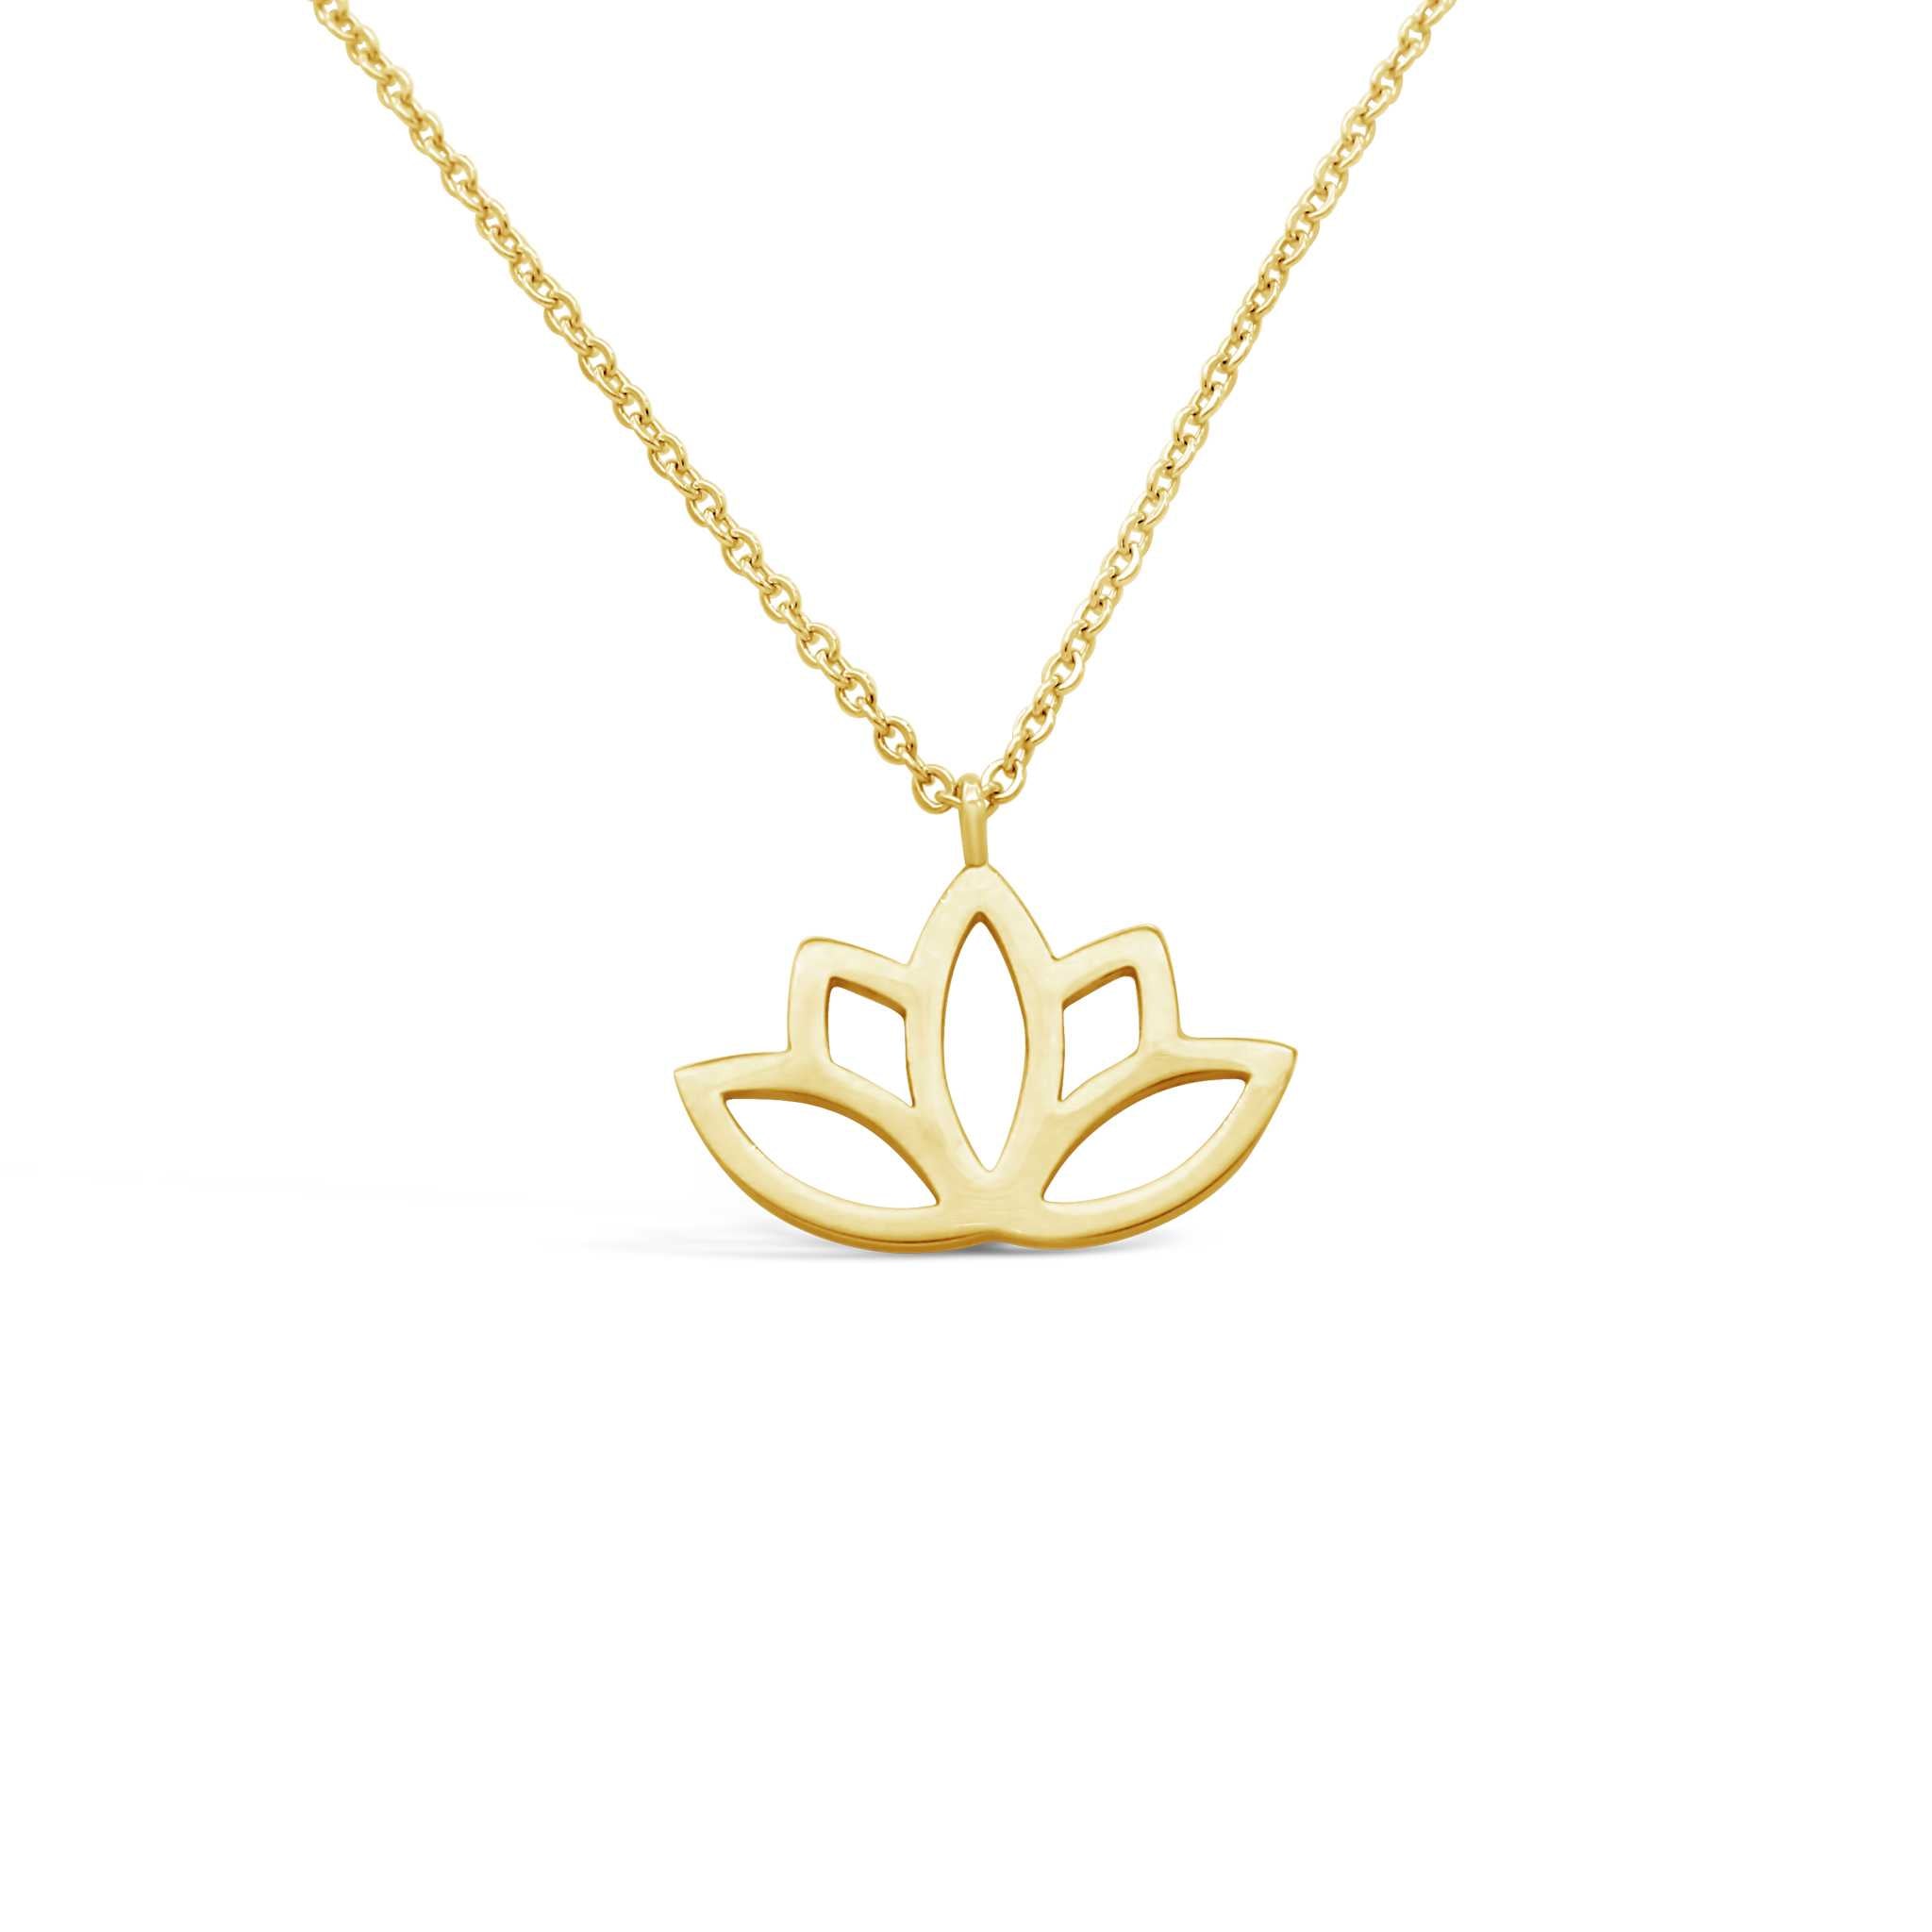 Necklaces - High Quality Jewelry - Simple Pledge